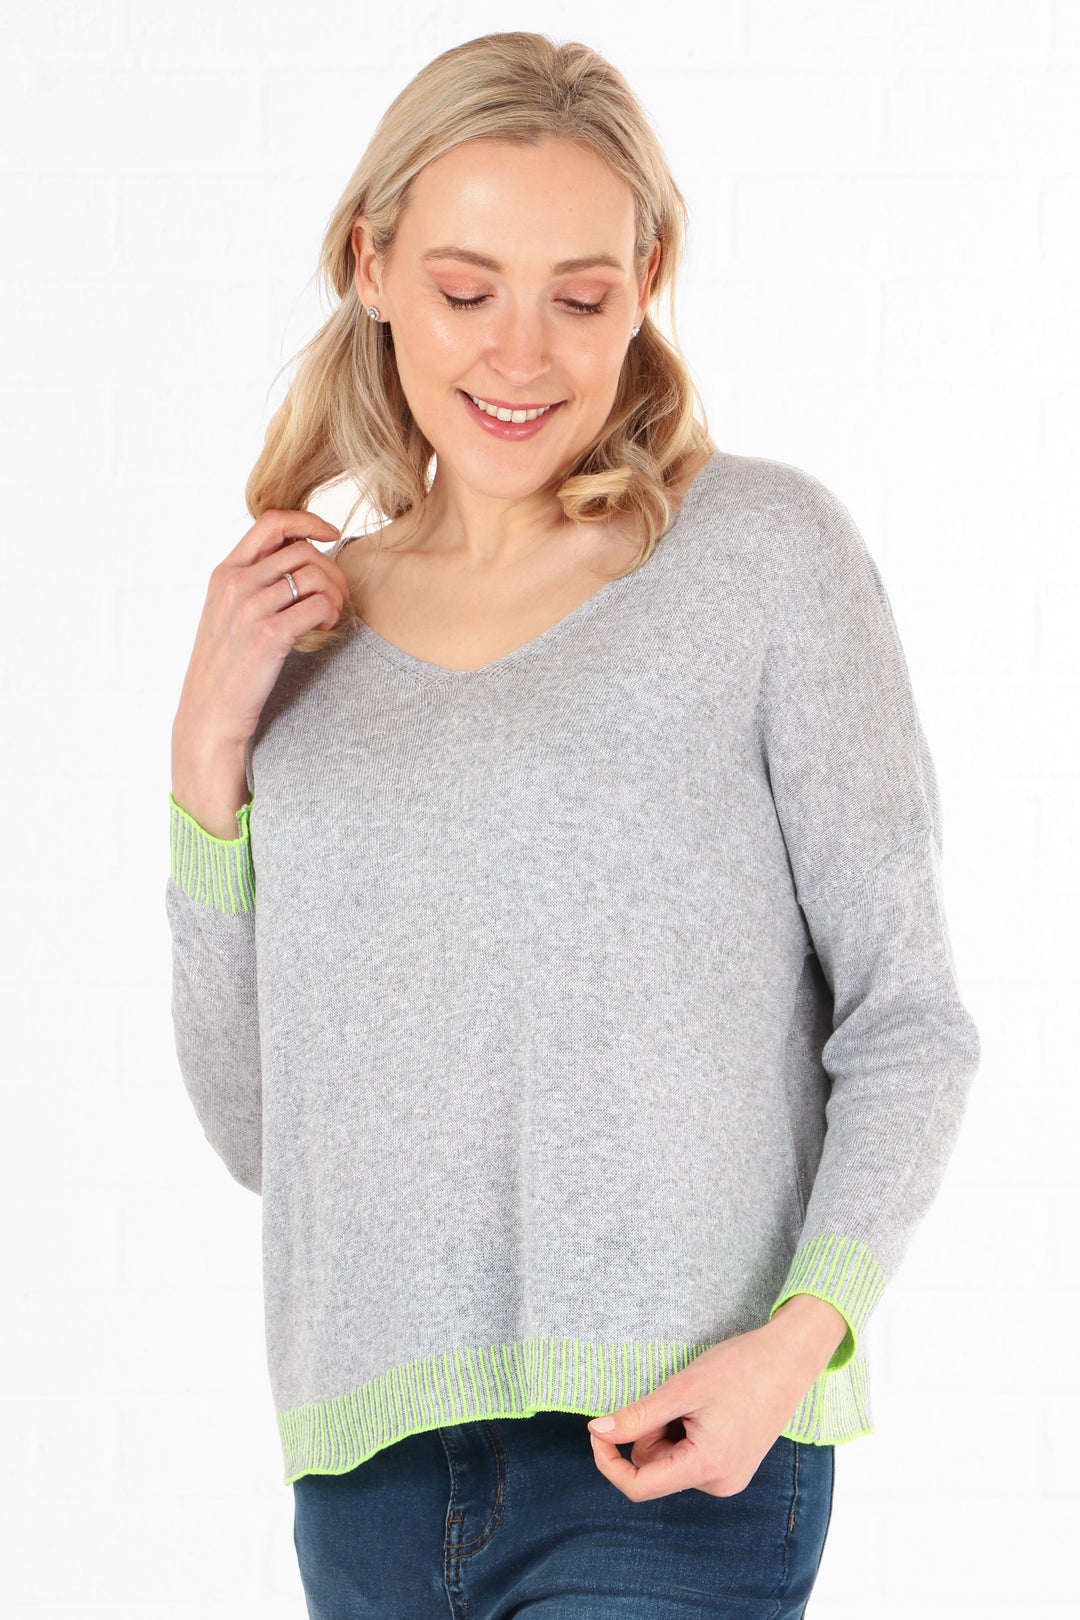 model wearing a v neck light grey cotton jumper with contasting lime green stitching on the edge and on the cuffs